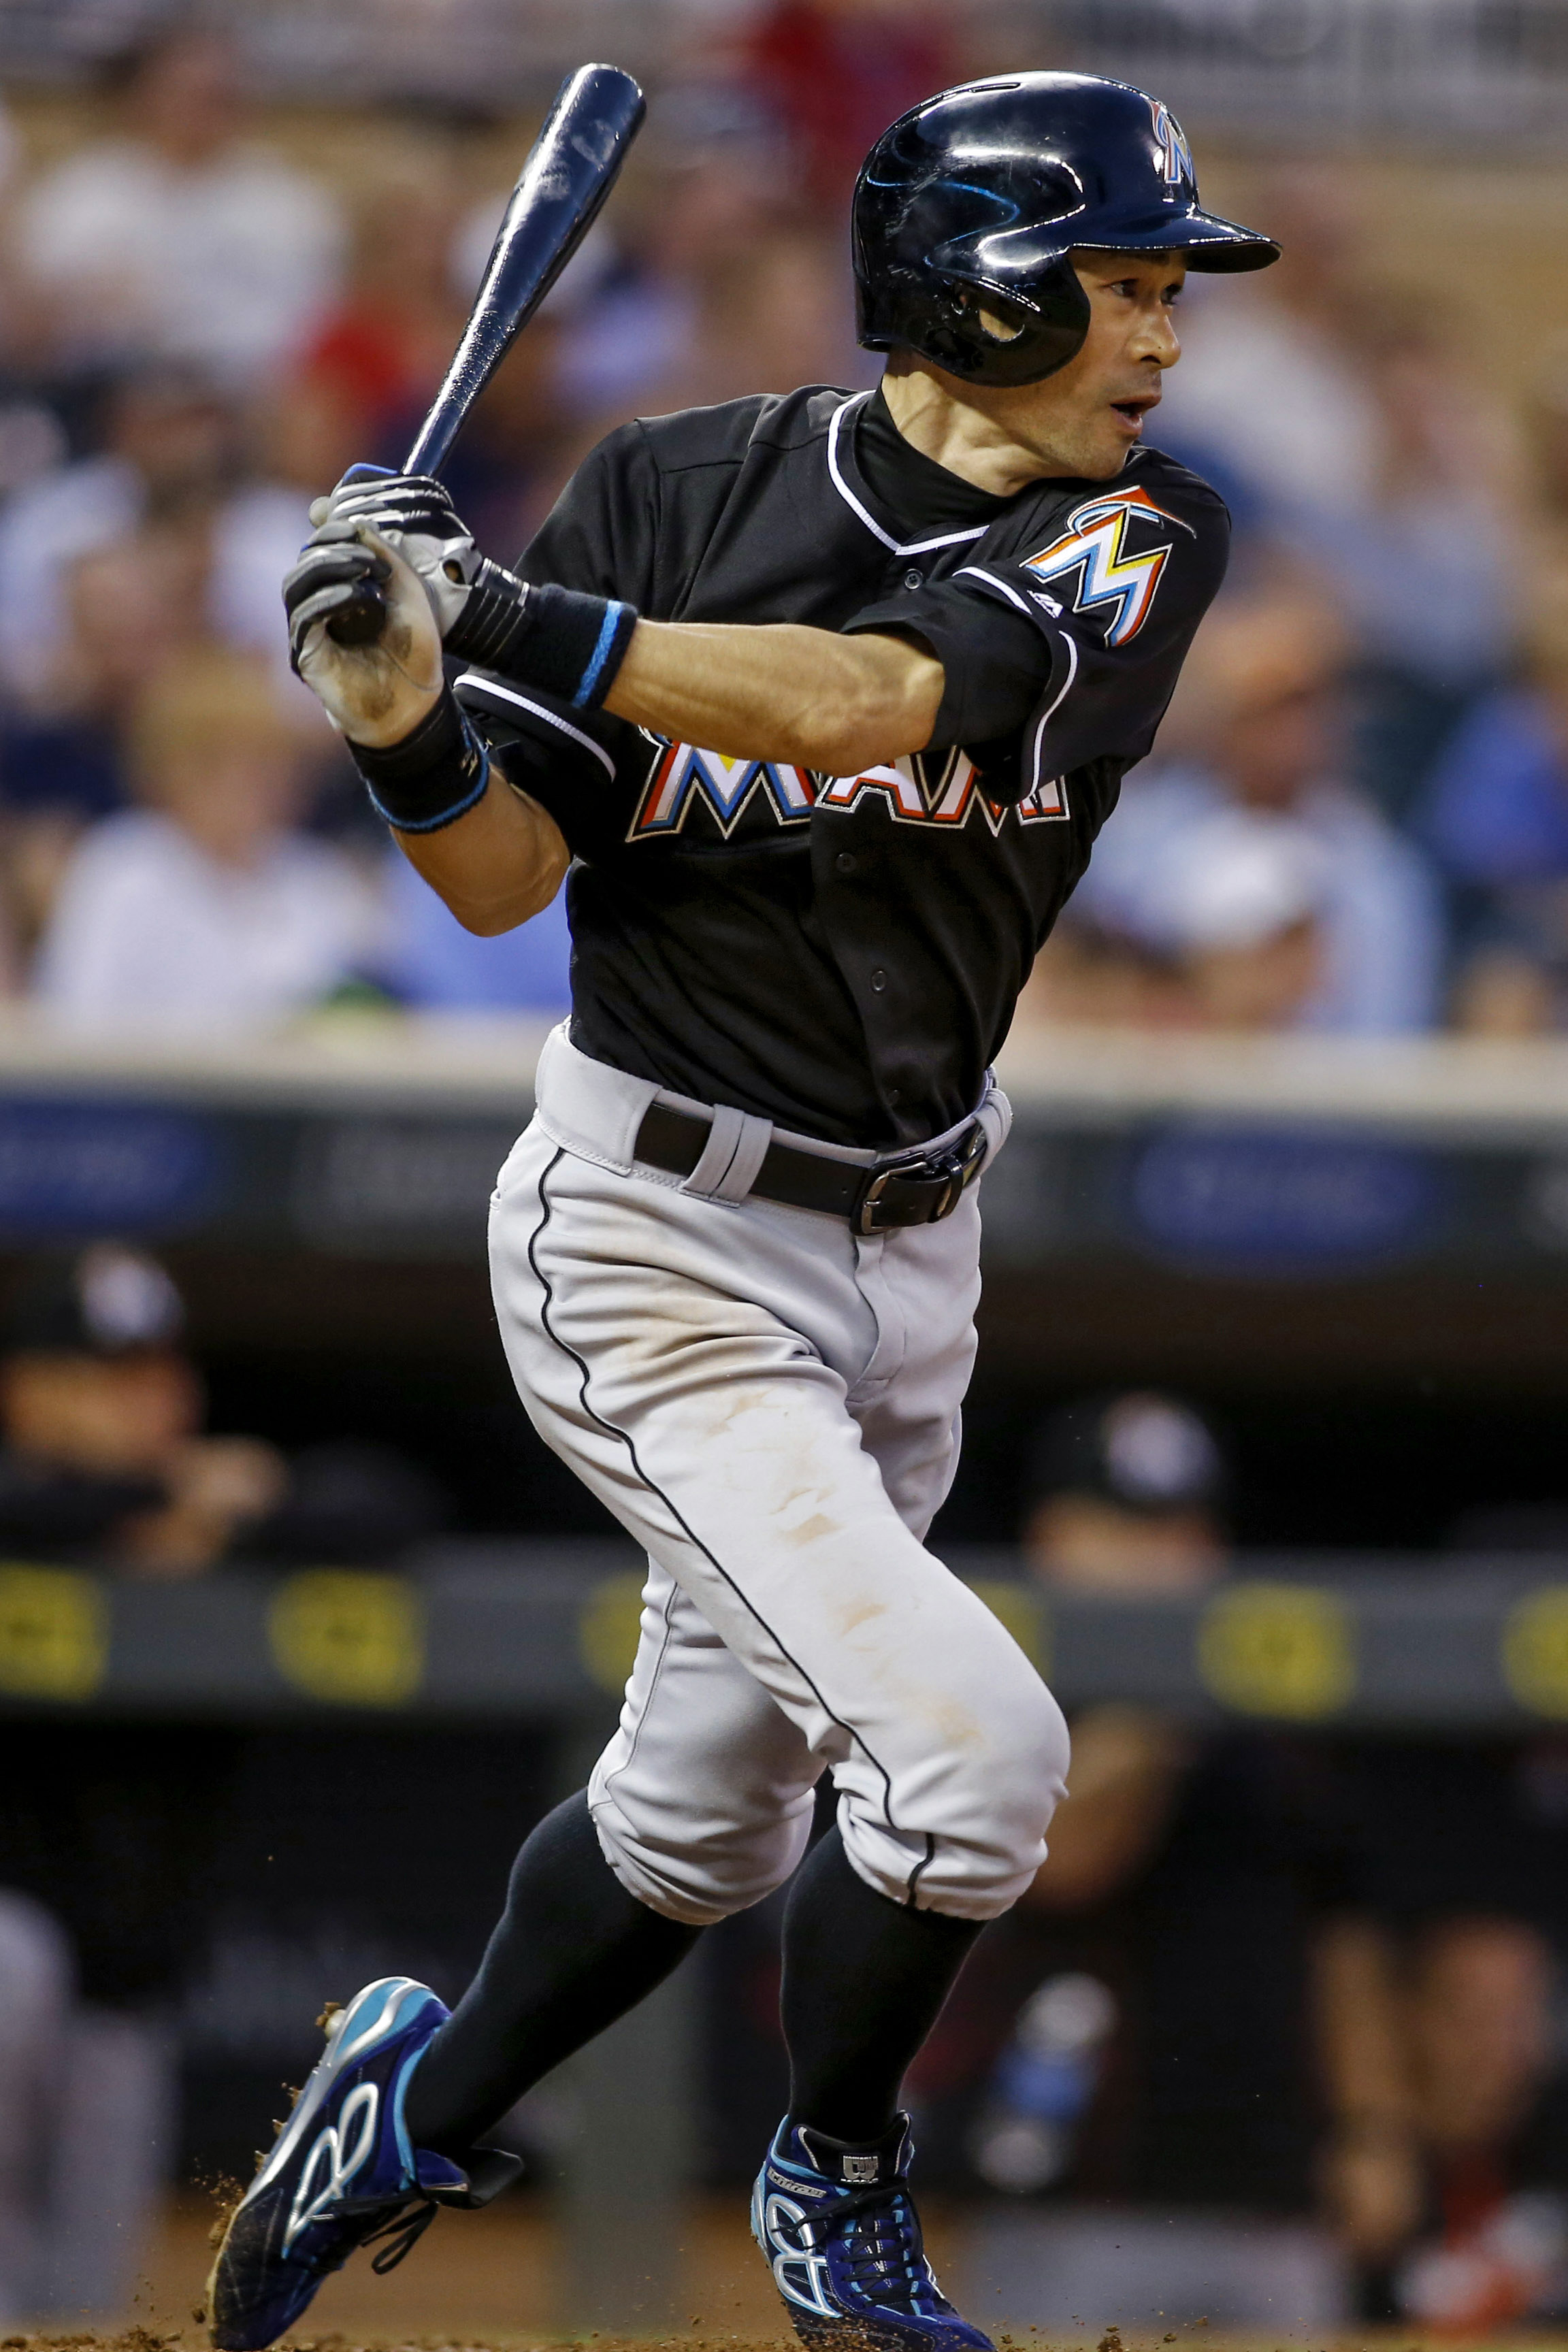 As Ichiro closes in, Pete Rose chafes: 'They're trying to make me